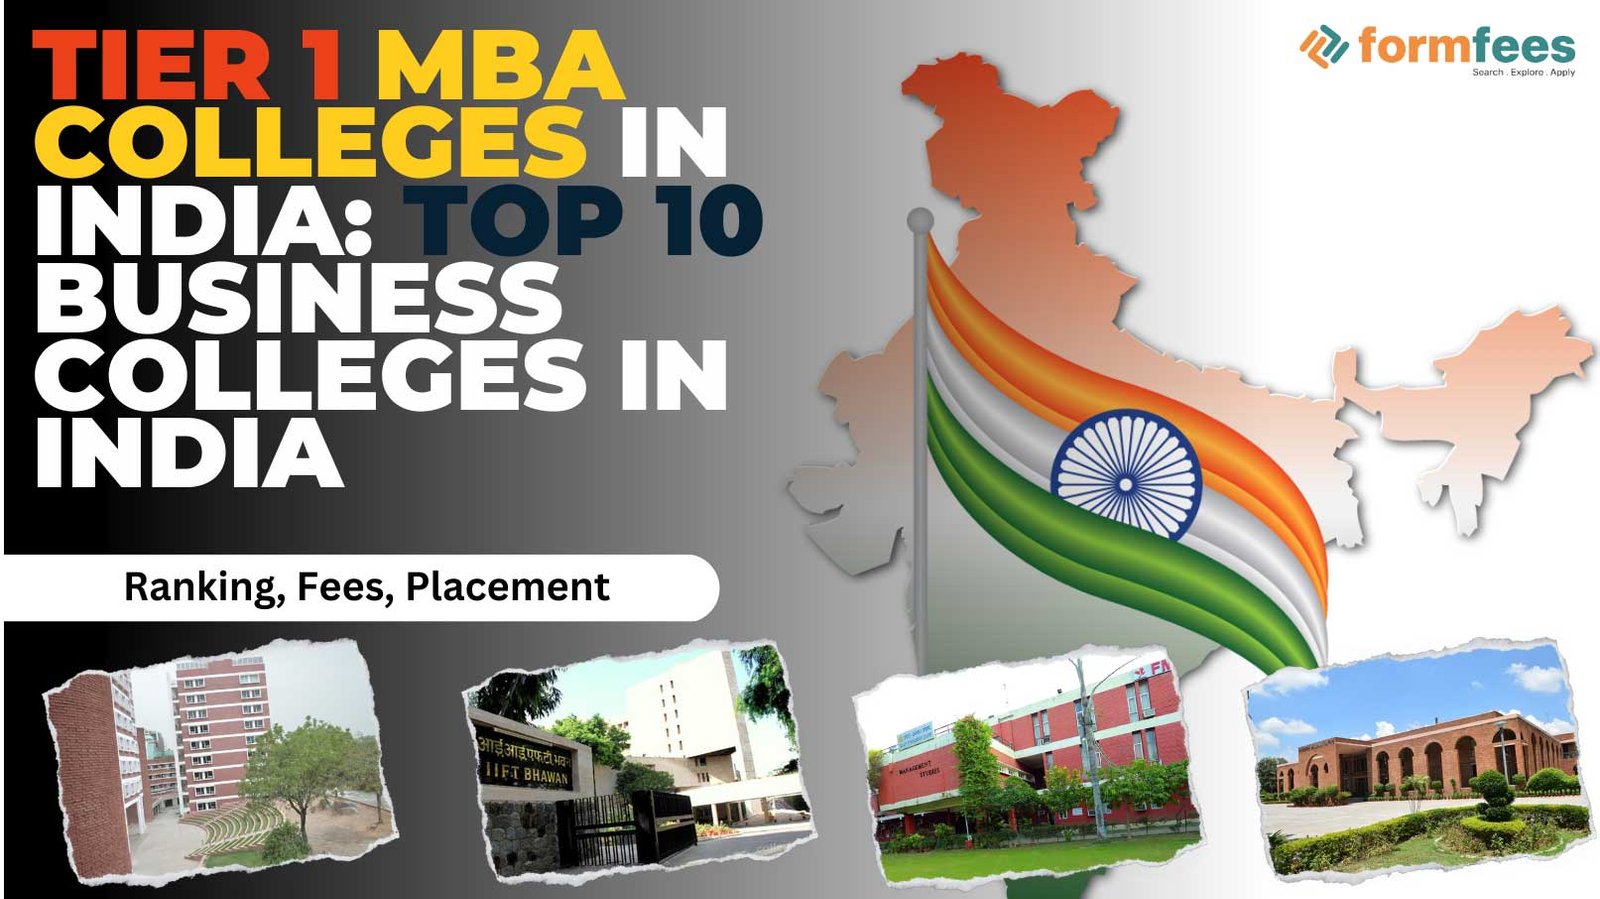 Tier 1 MBA Colleges in india: Top 10 Business Colleges in India